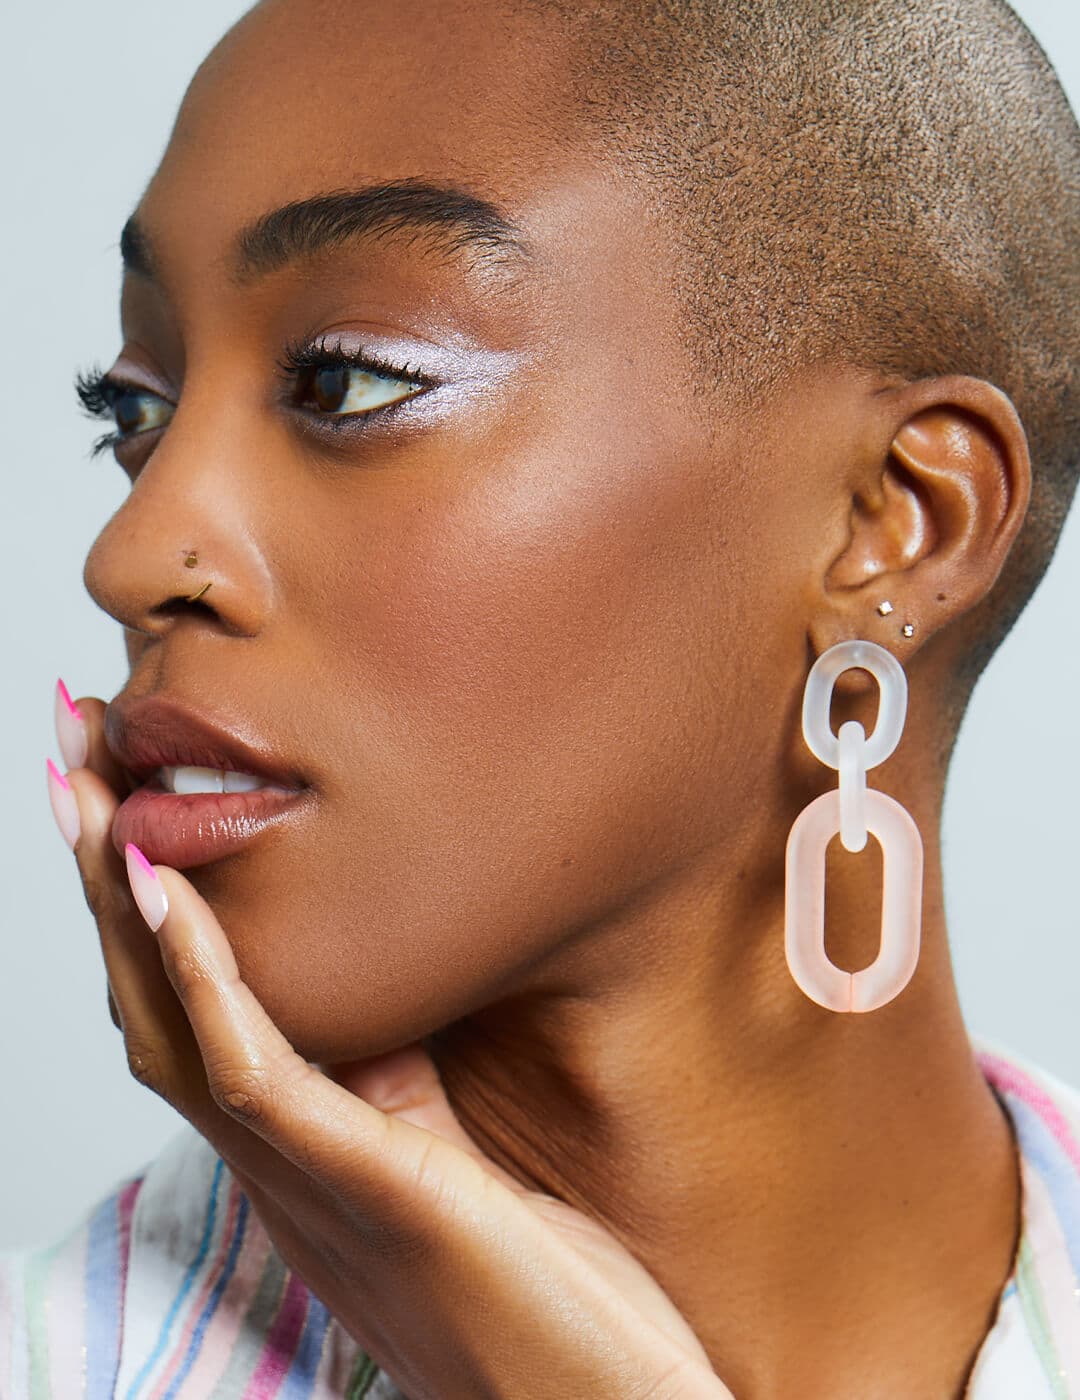 Side profile of a beautiful Black woman rocking a silver eyeshadow makeup look and frosty chains earrings